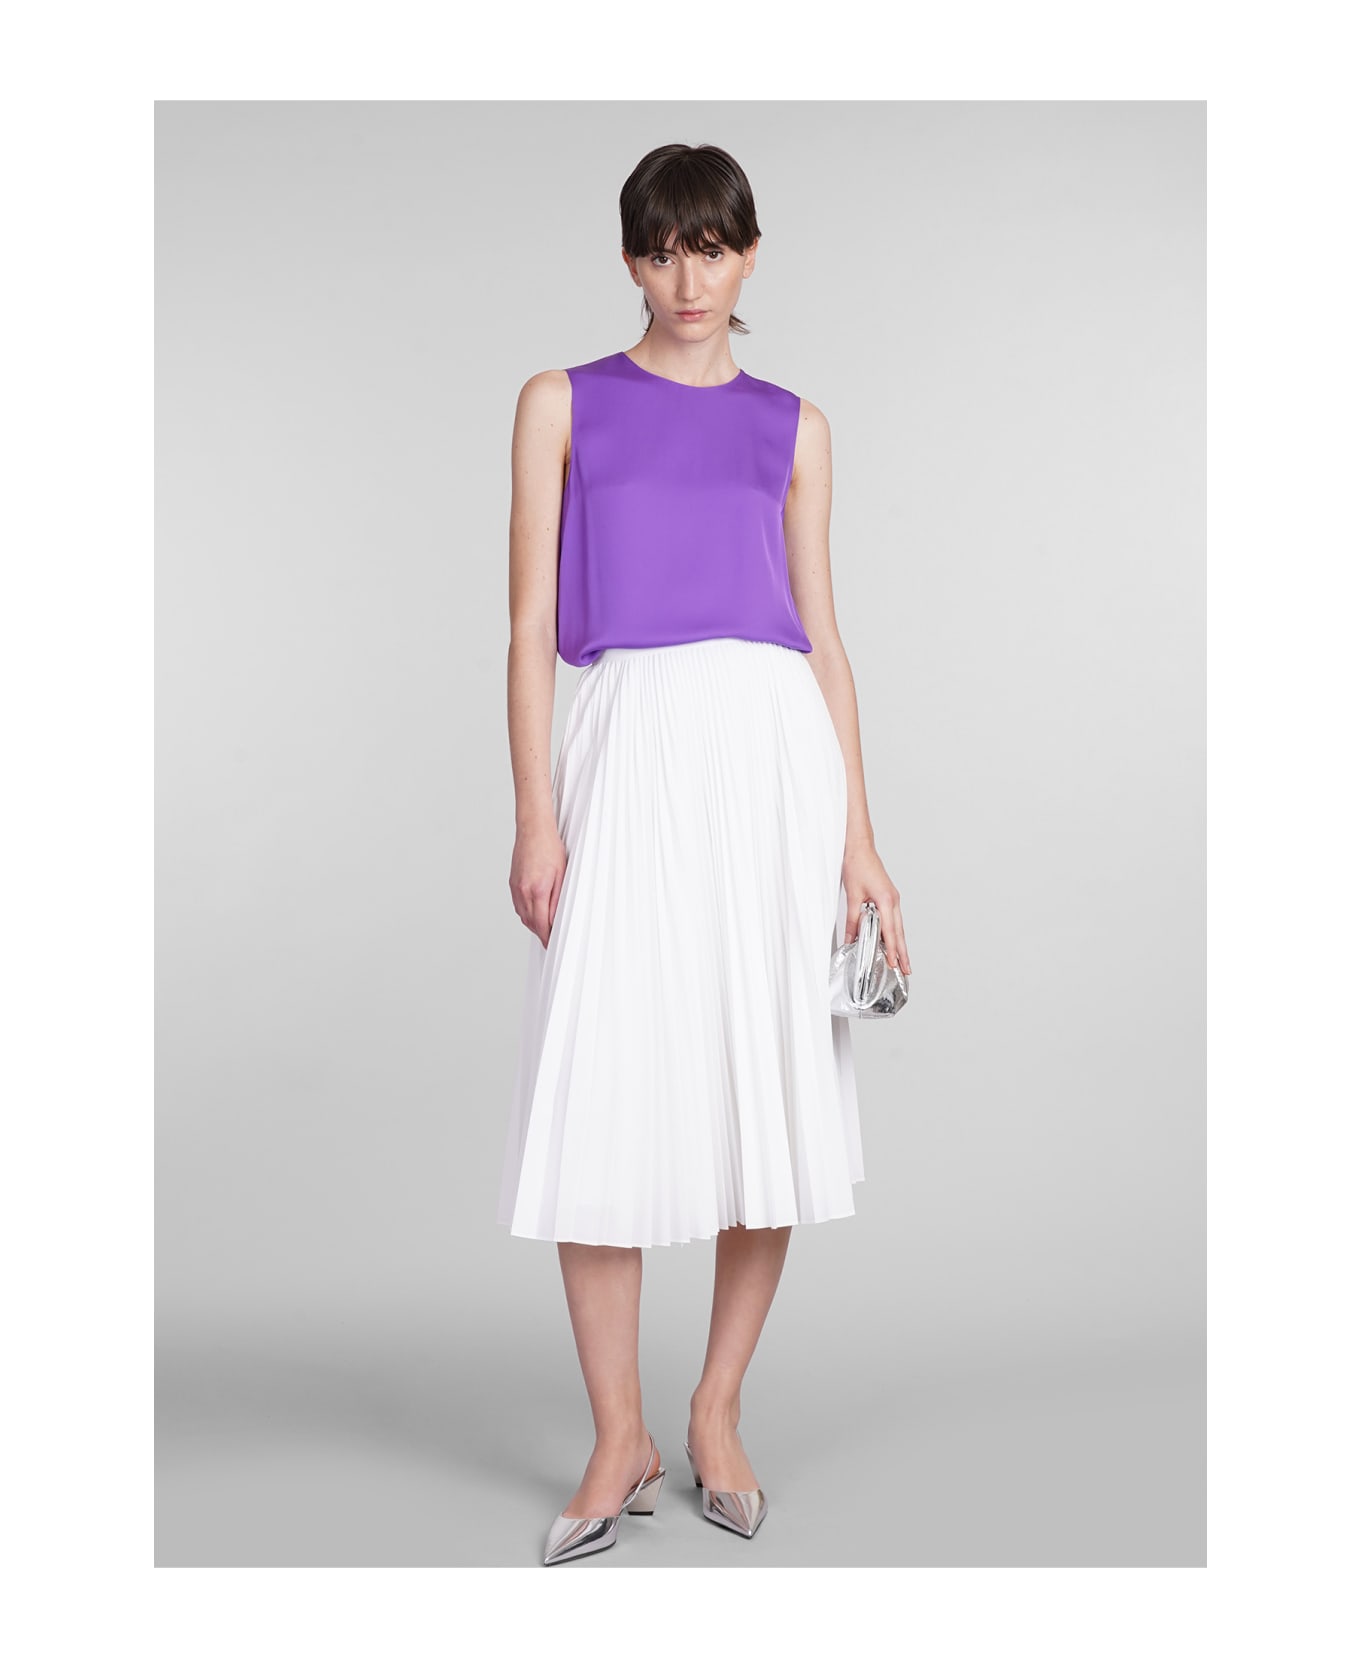 Theory Skirt In White Polyester - white